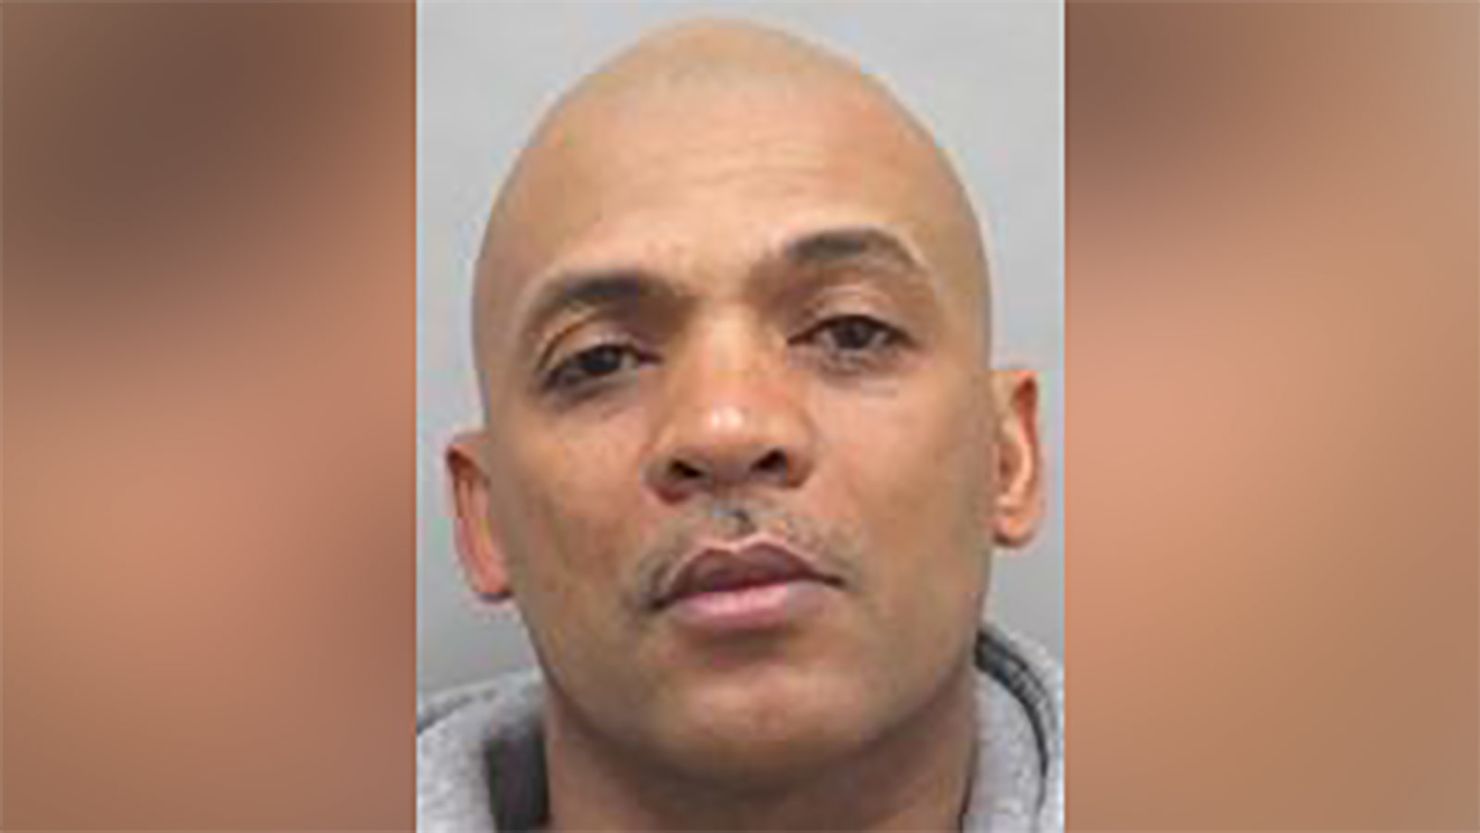 Darrick Bell, 50, had been on ICE's Most Wanted list for more than two years.